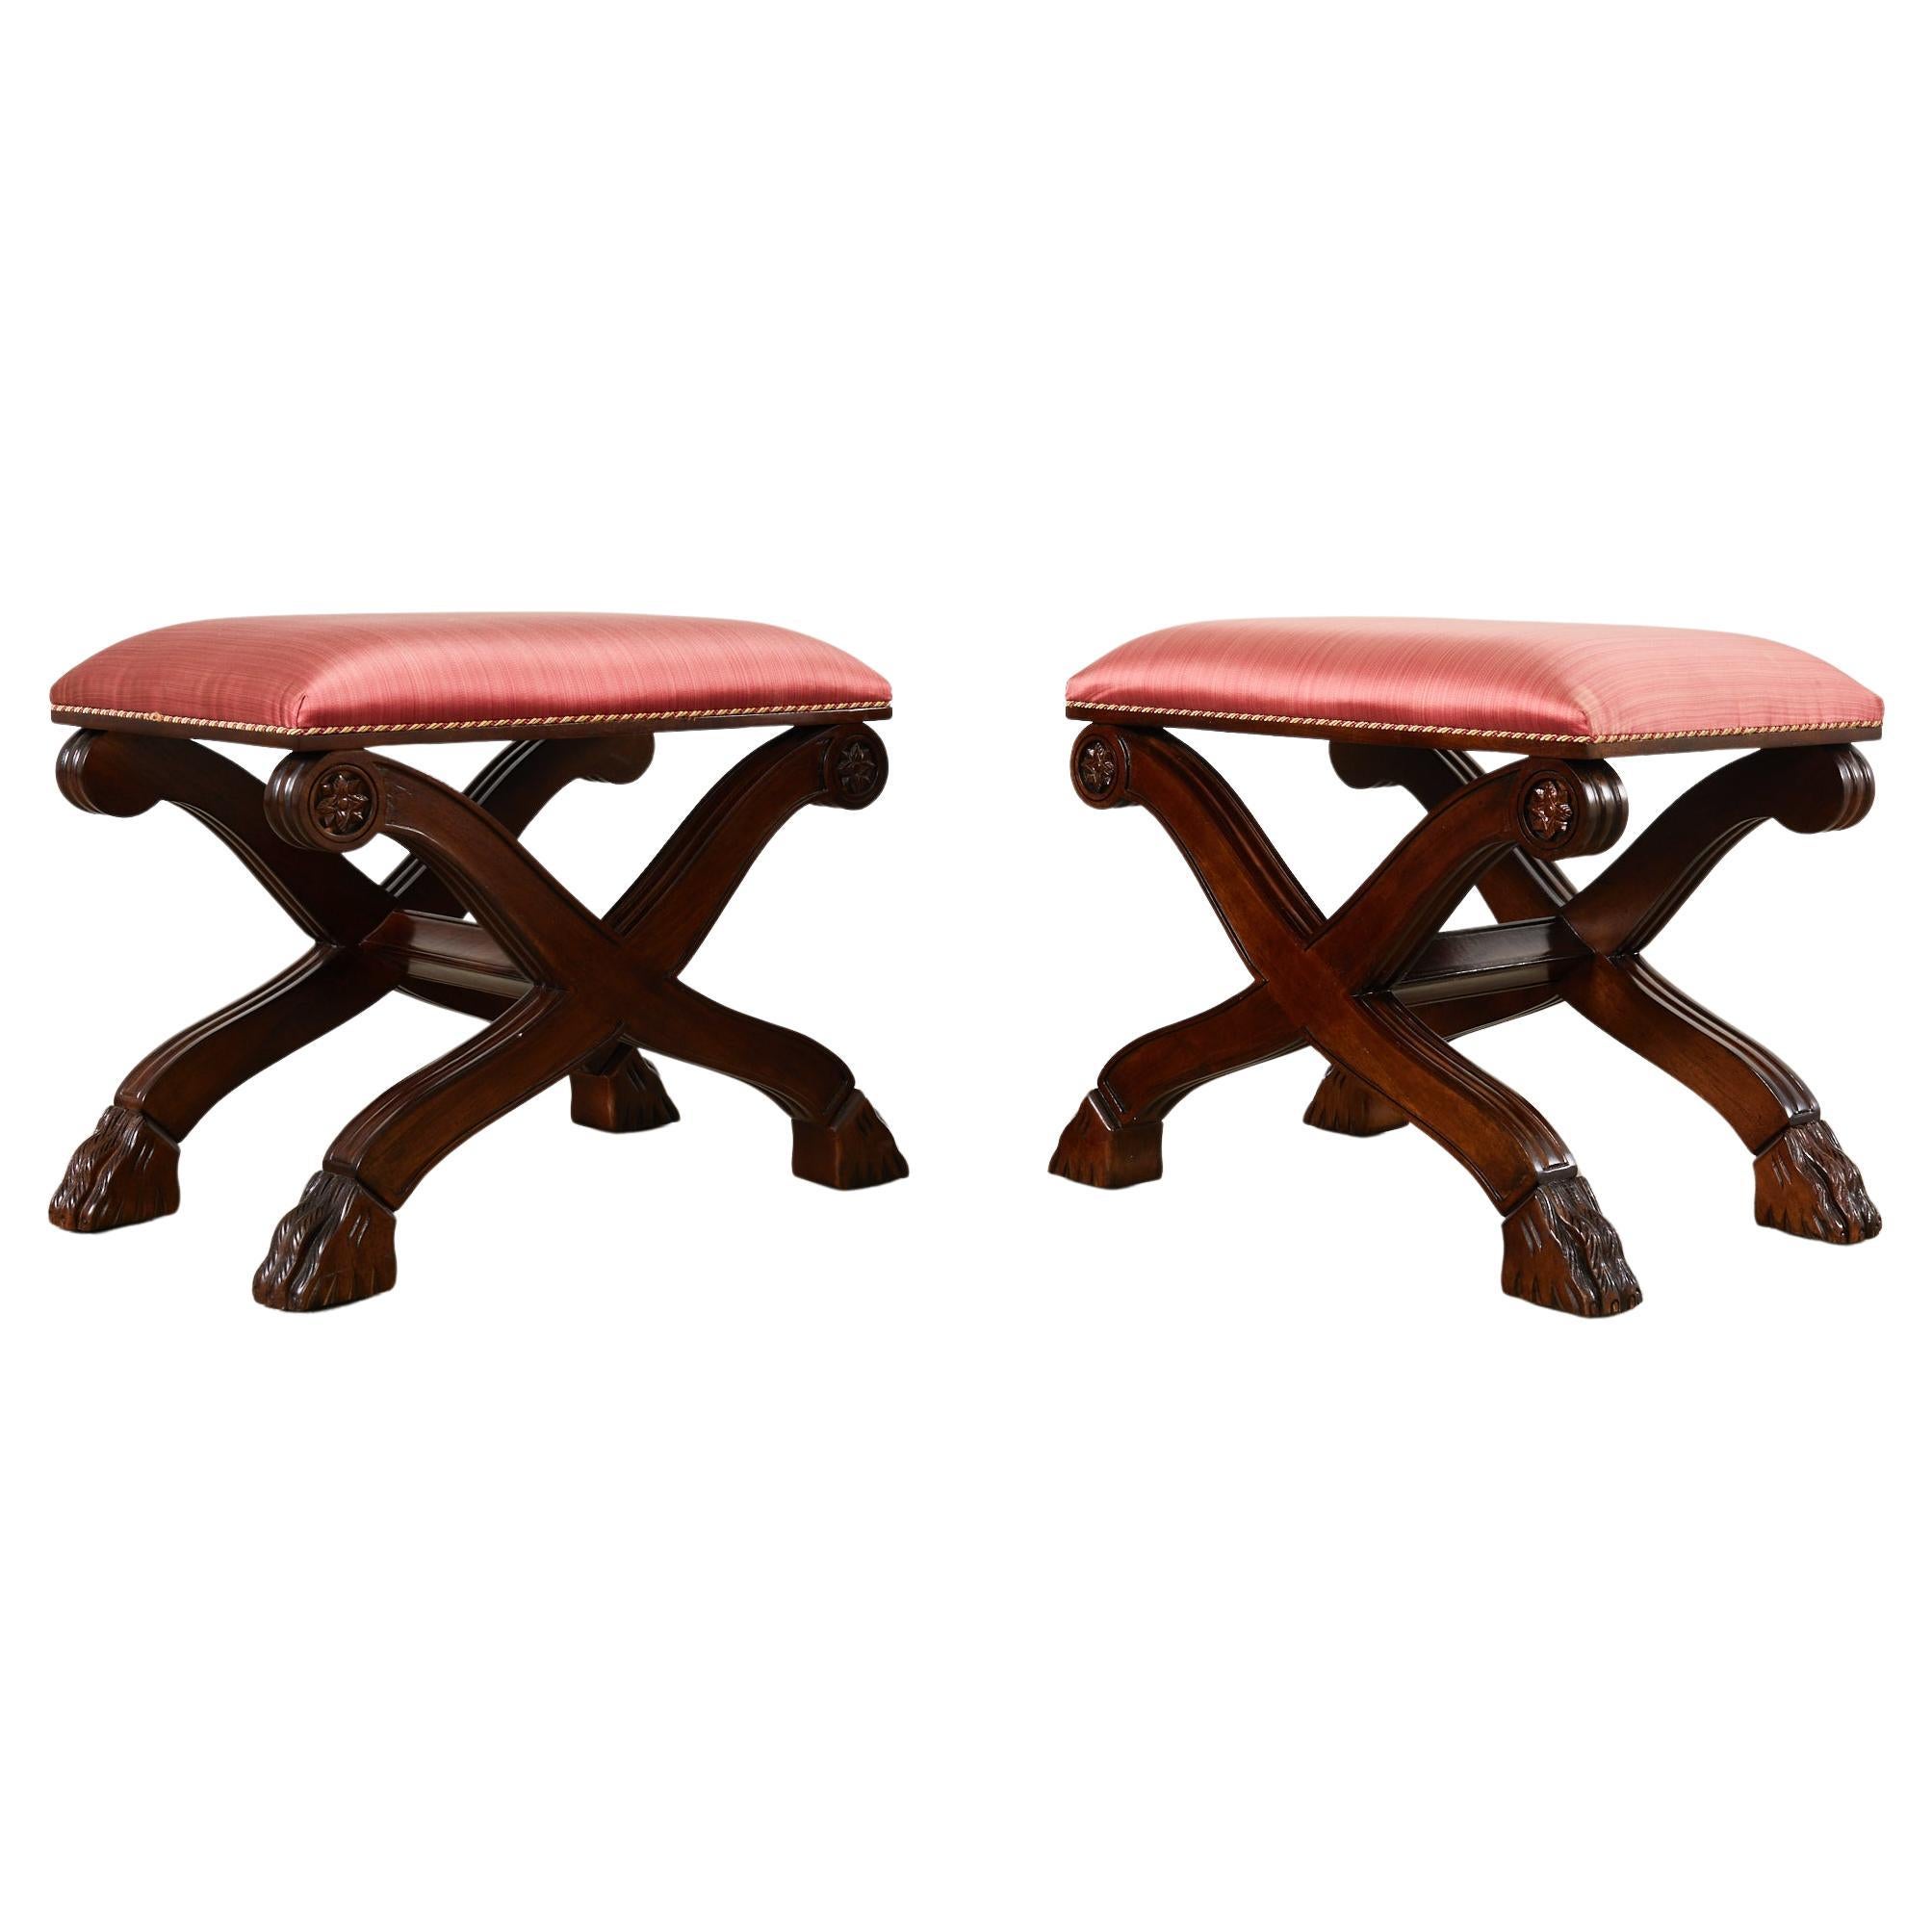 Pair of Neoclassical Style X-Form Walnut Benches Stools For Sale